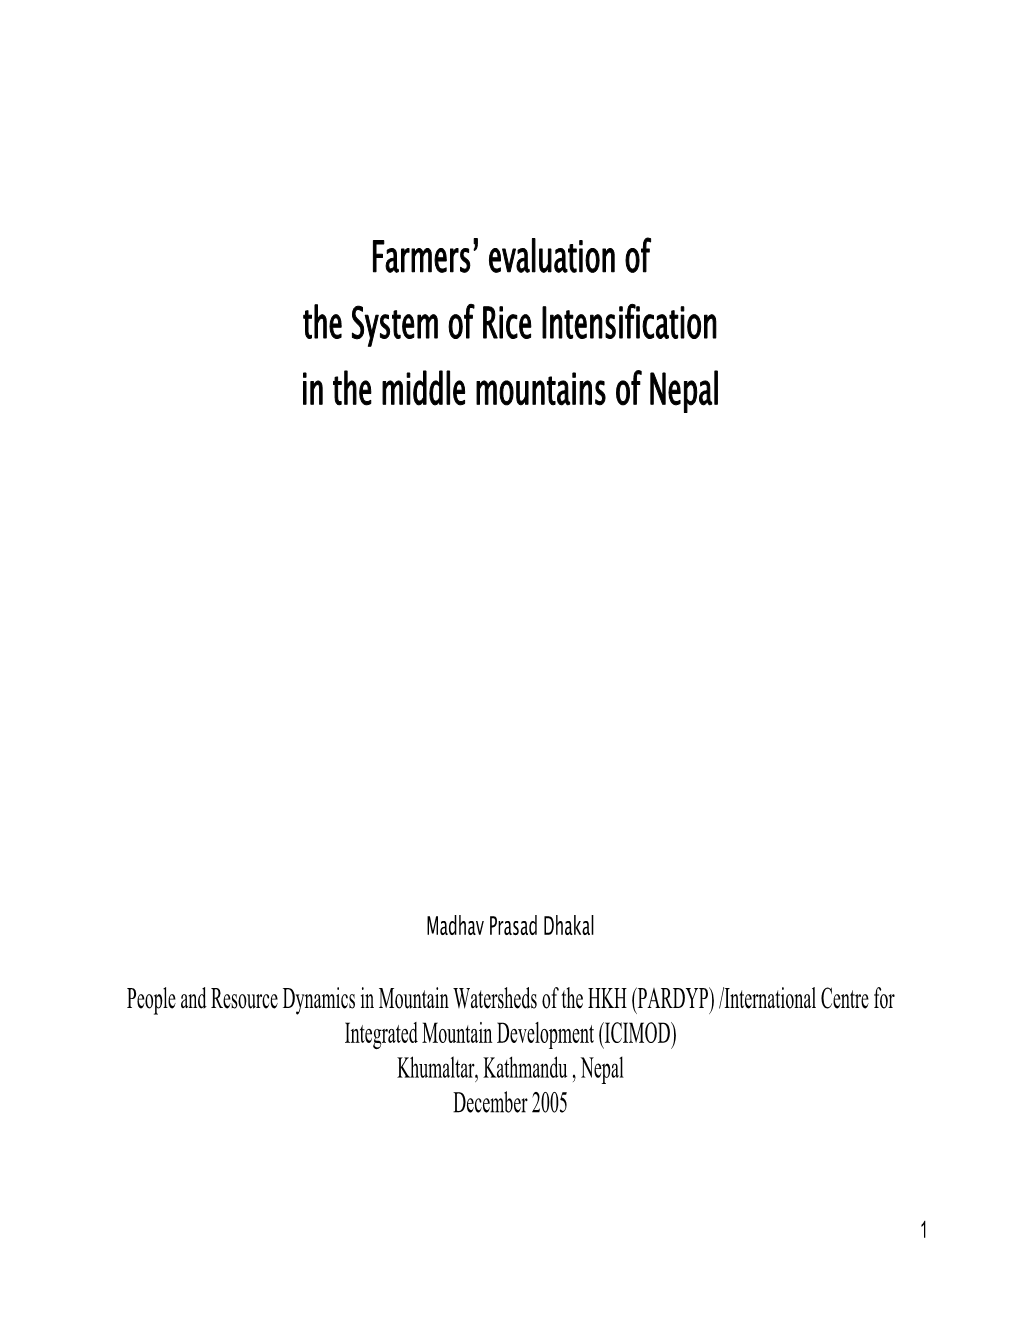 Farmers' Evaluation of the System of Rice Intensification in the Middle